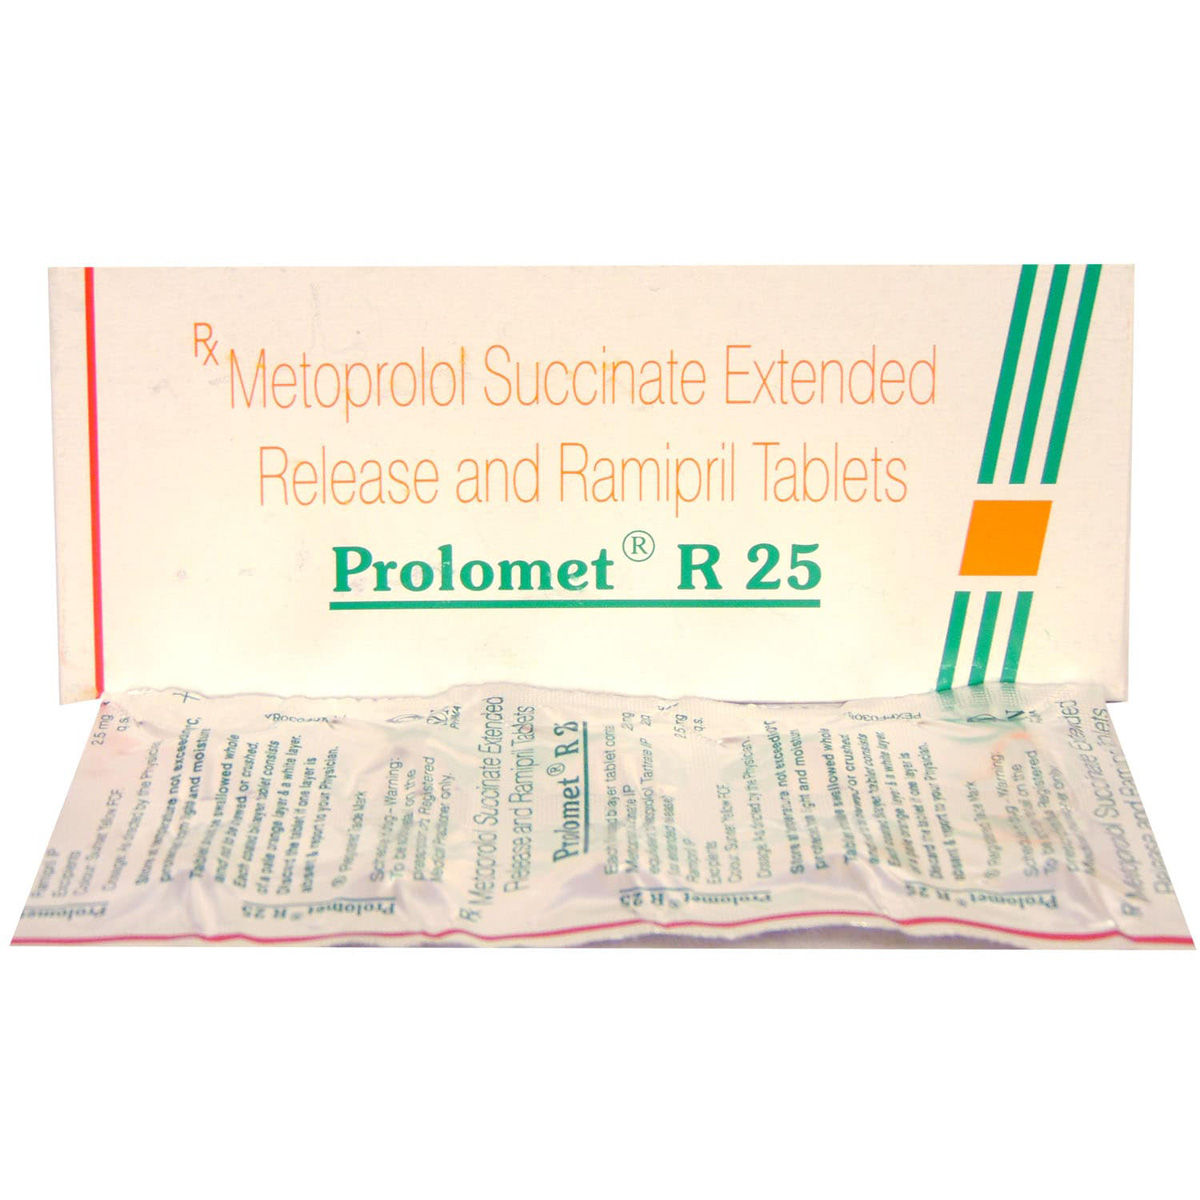 Prolomet R 25 Tablet 10's Price, Uses, Side Effects, Composition ...